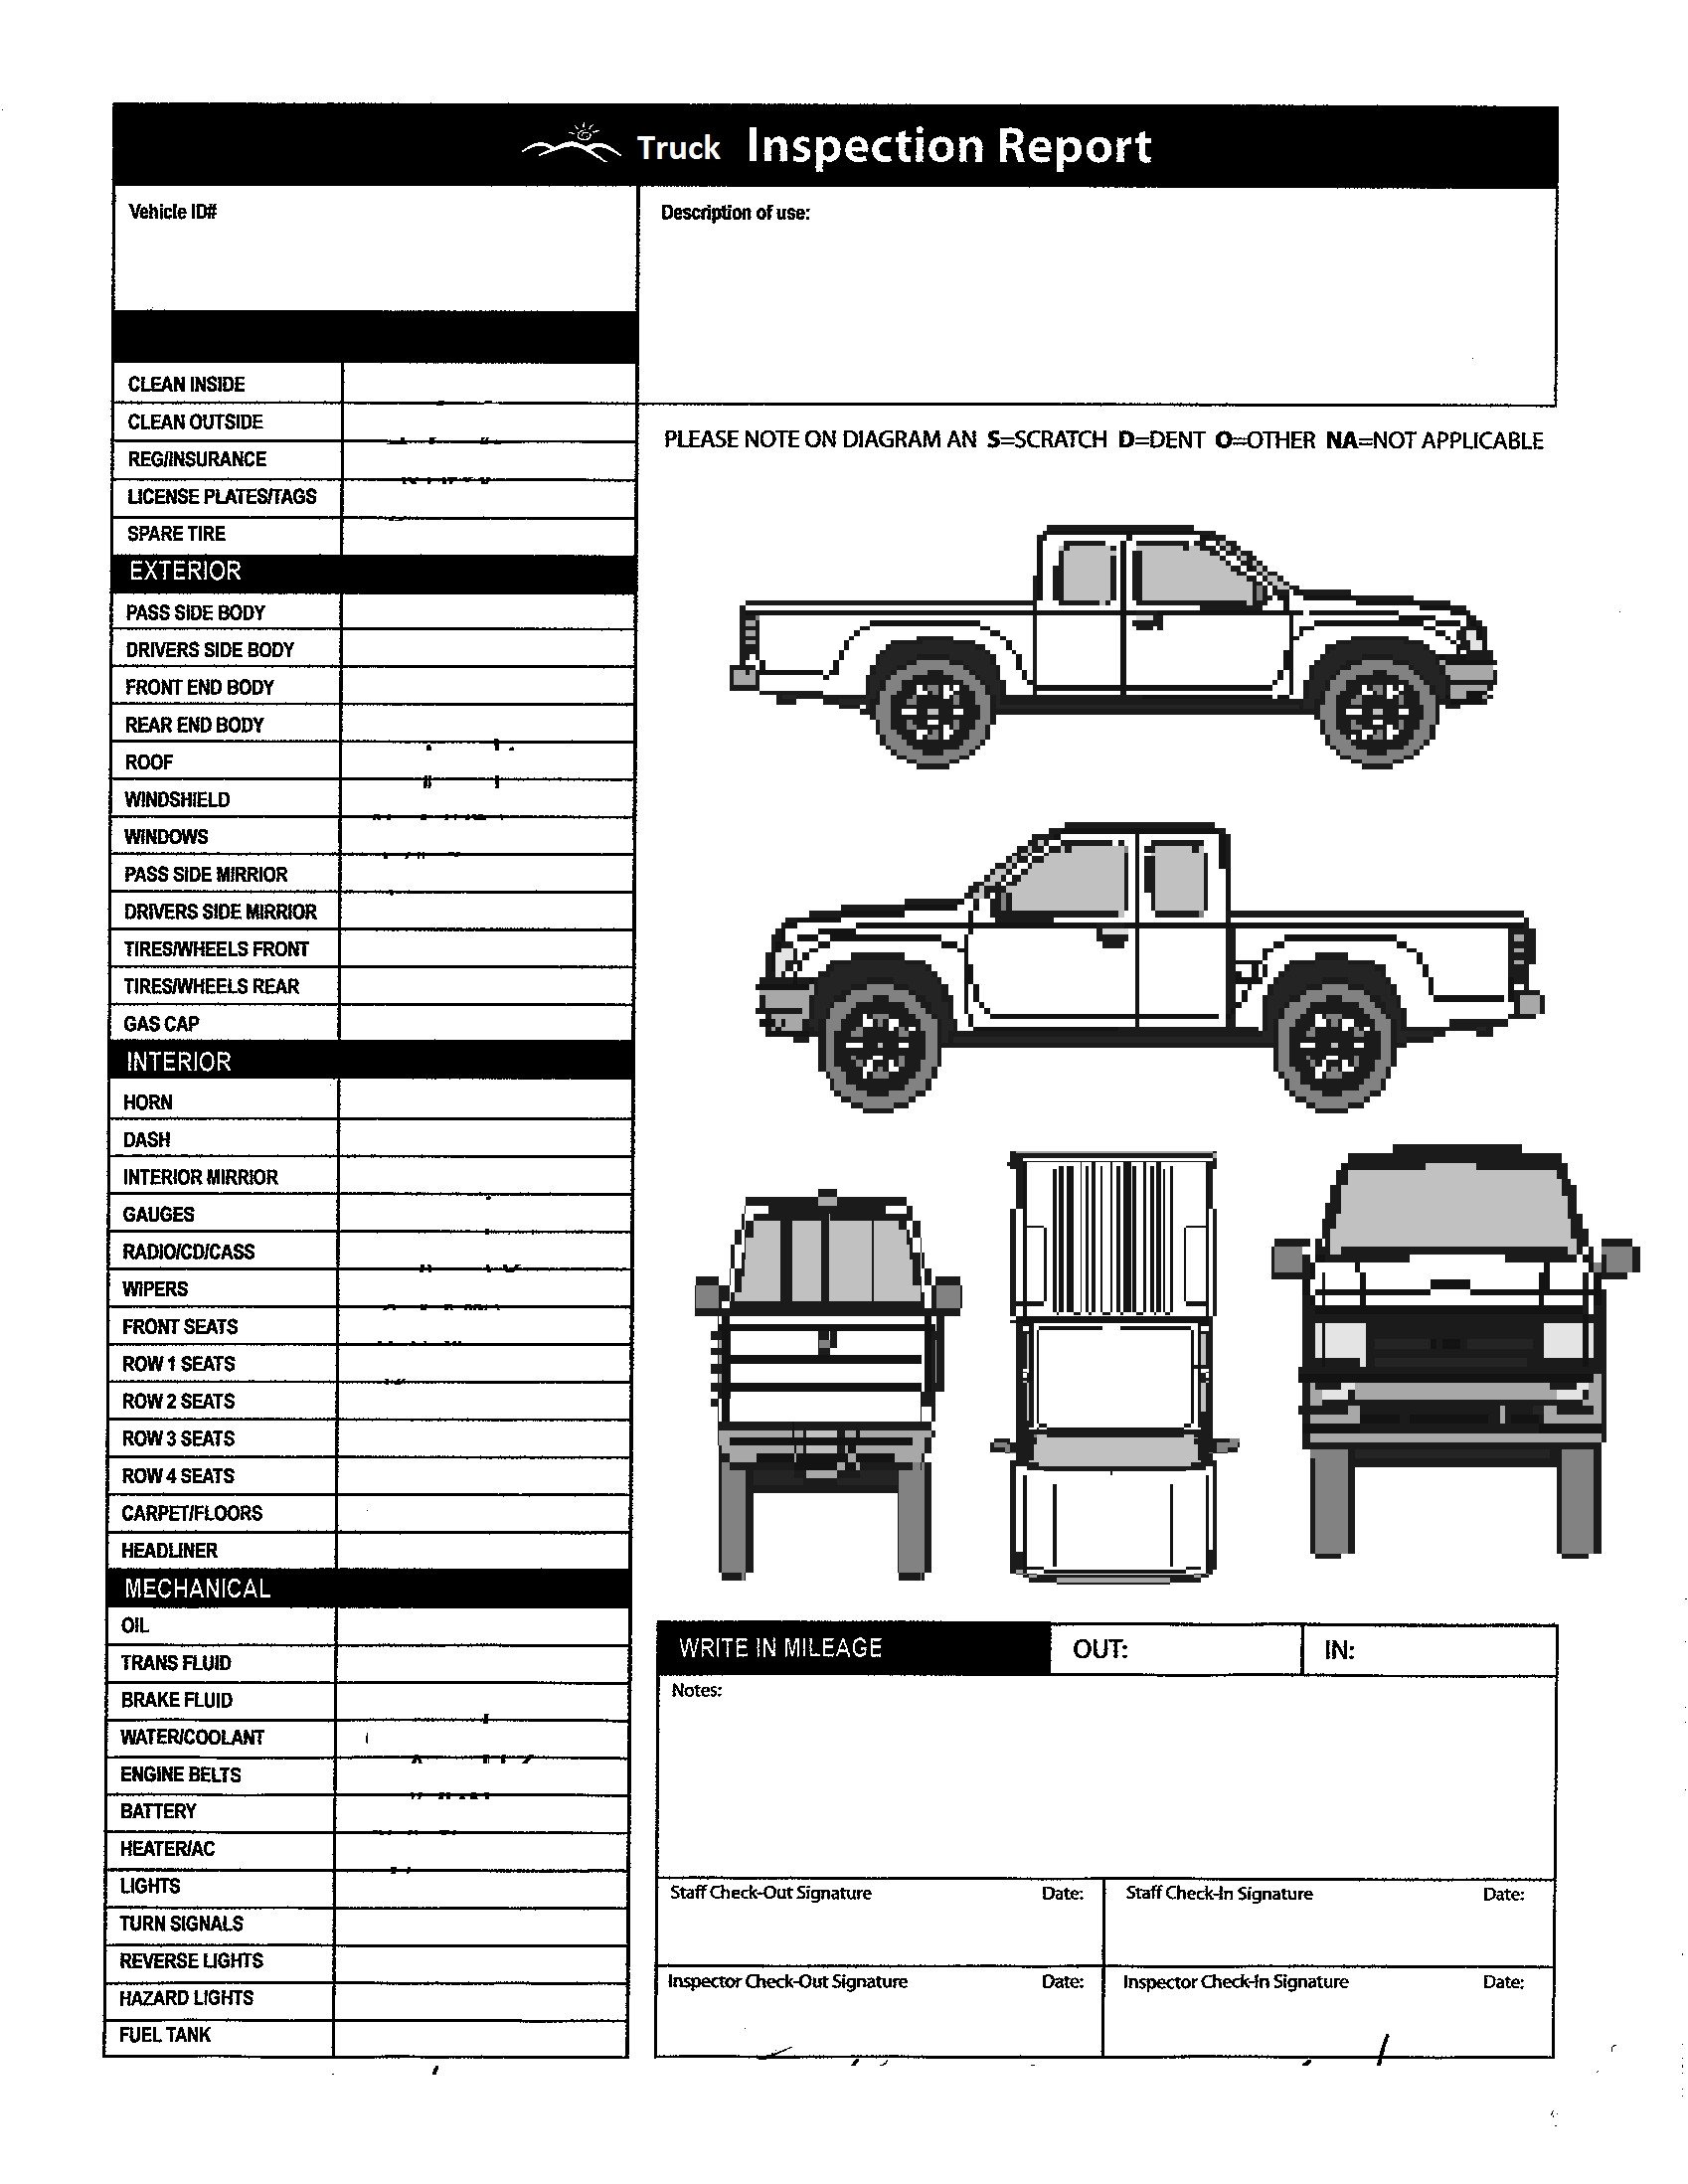 Truck Inspection form Template Vehicle Inspection form Template